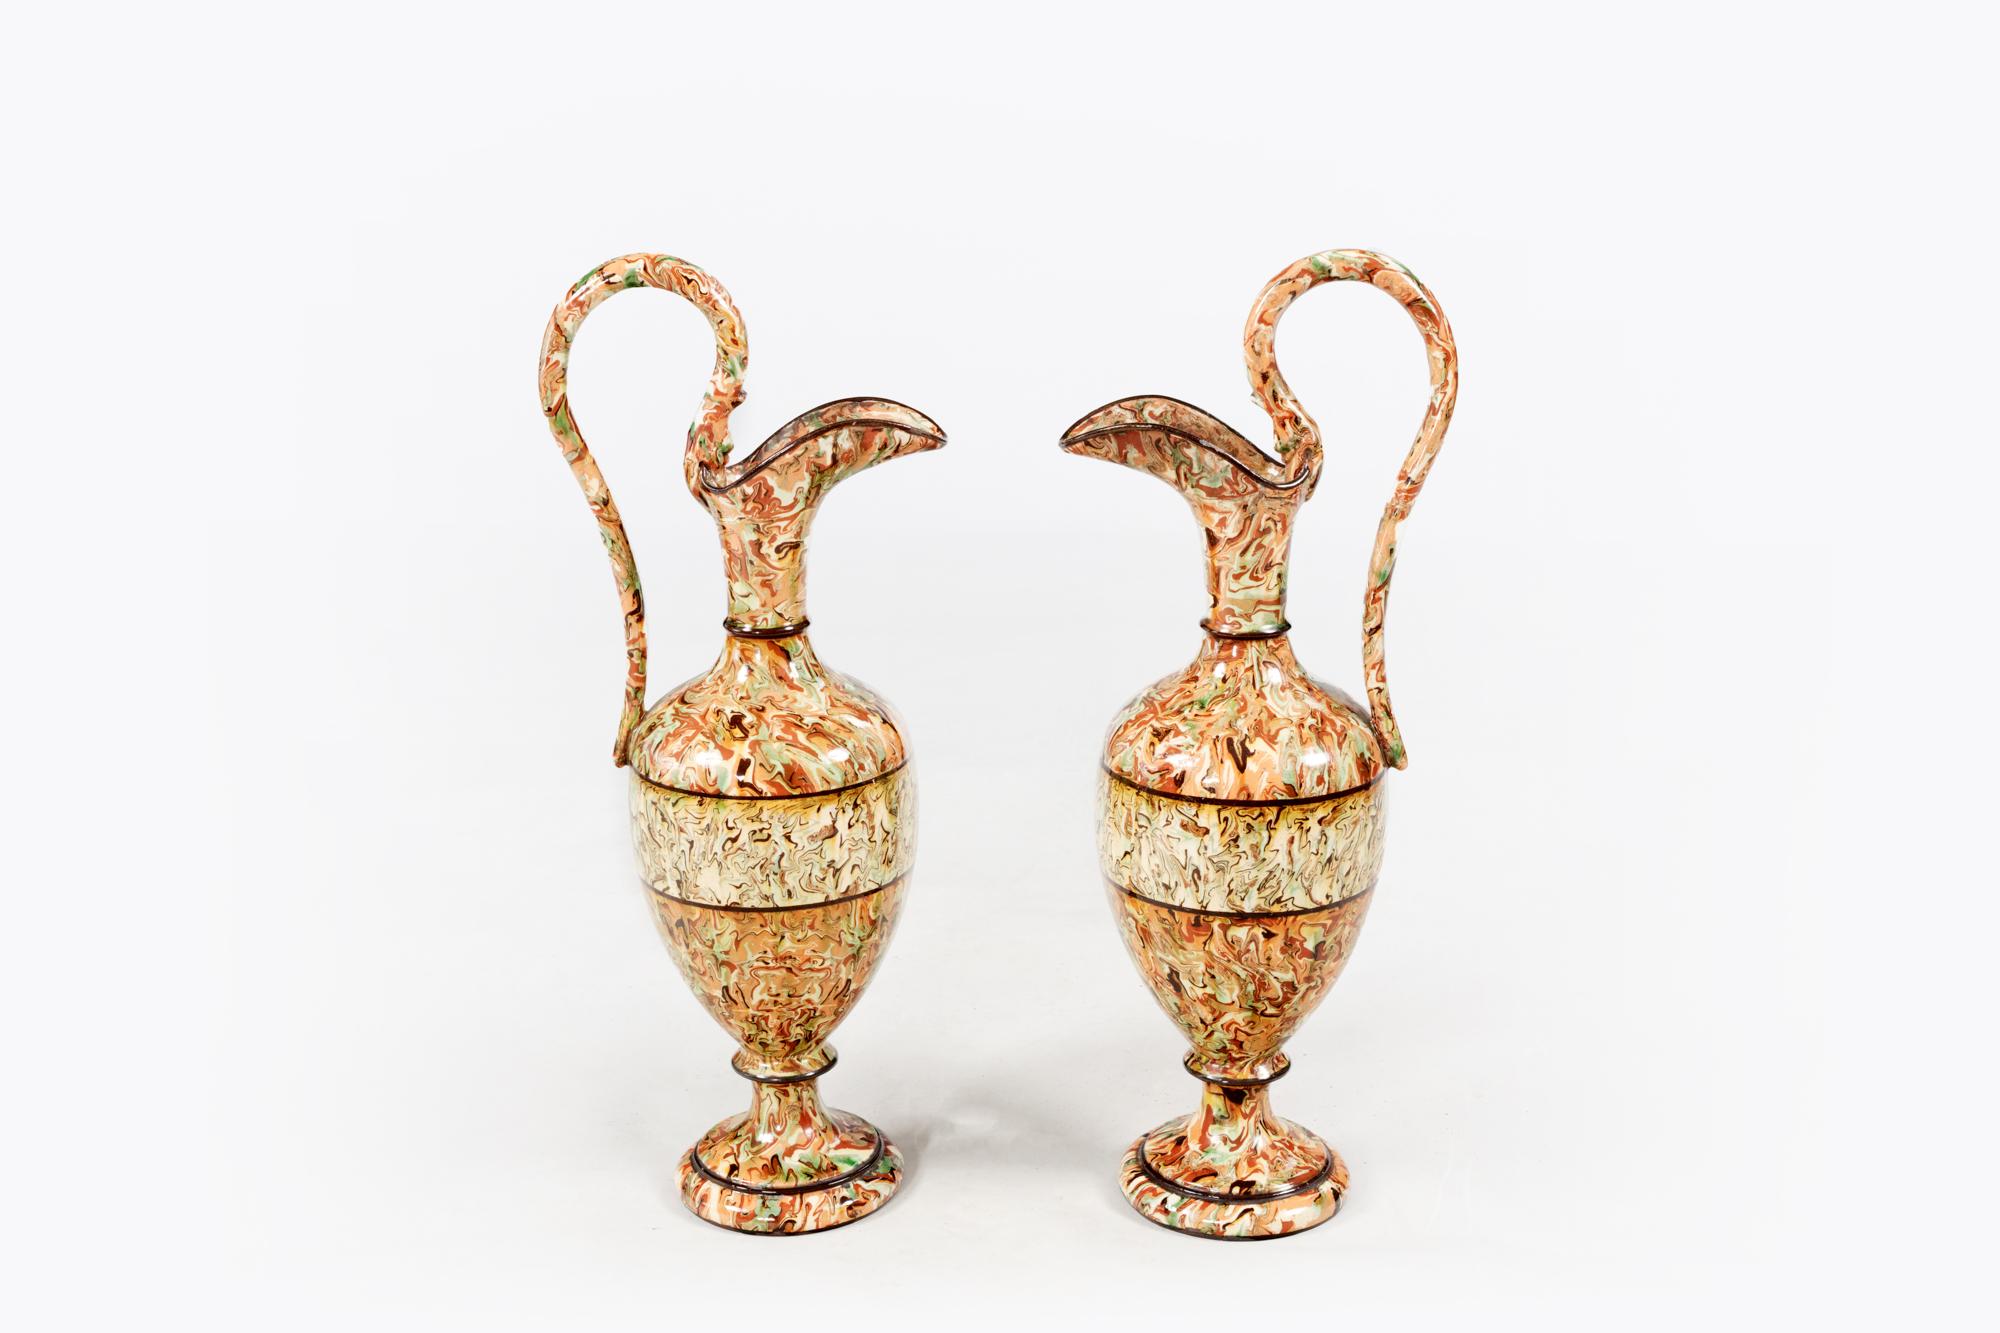 Pair of Provençale 19th century agateware ewers by Pichon, Uzes, France C.1880

Agateware is pottery decorated with a combination of colored clays to create an effect similar to agate gemstone.
 